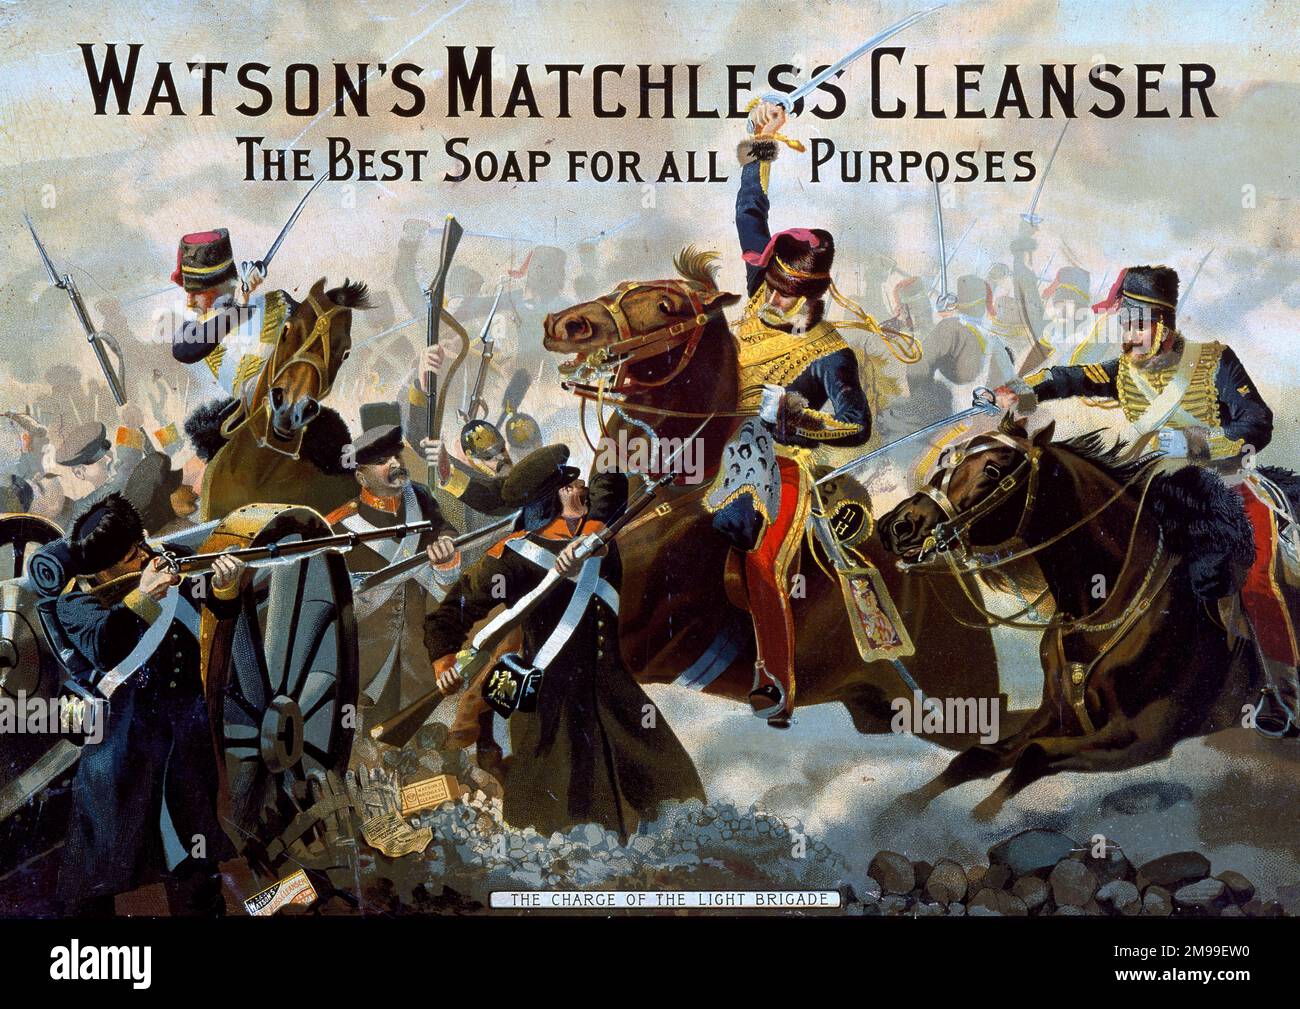 Advertising Showcard, Charge of the Light Brigade, Watson's Matchless Cleanser, the best soap for all purposes. Stock Photo